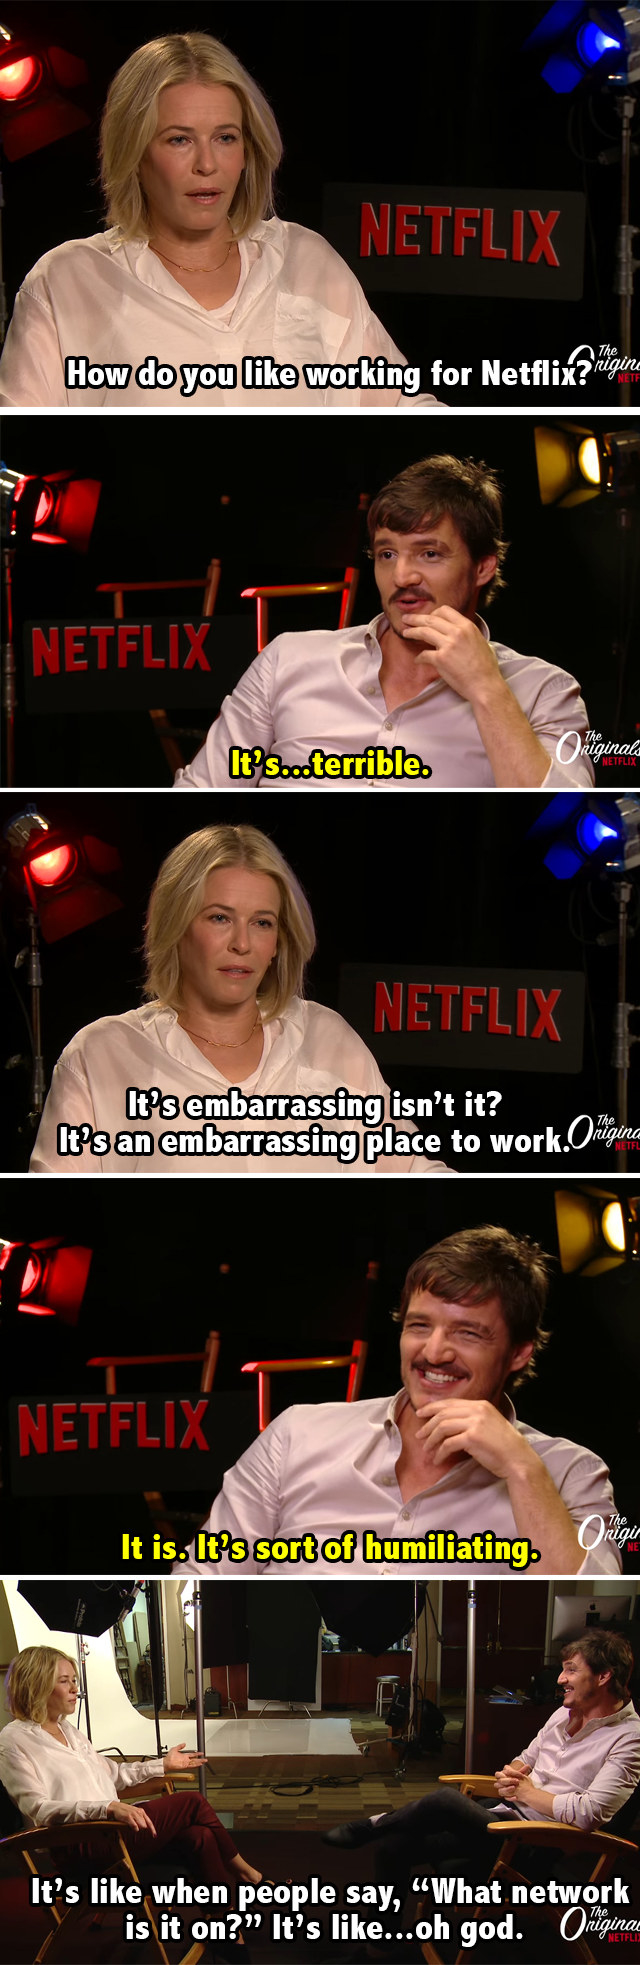 both actors saying it&#x27;s embarrassing to work at Netflix and laughing